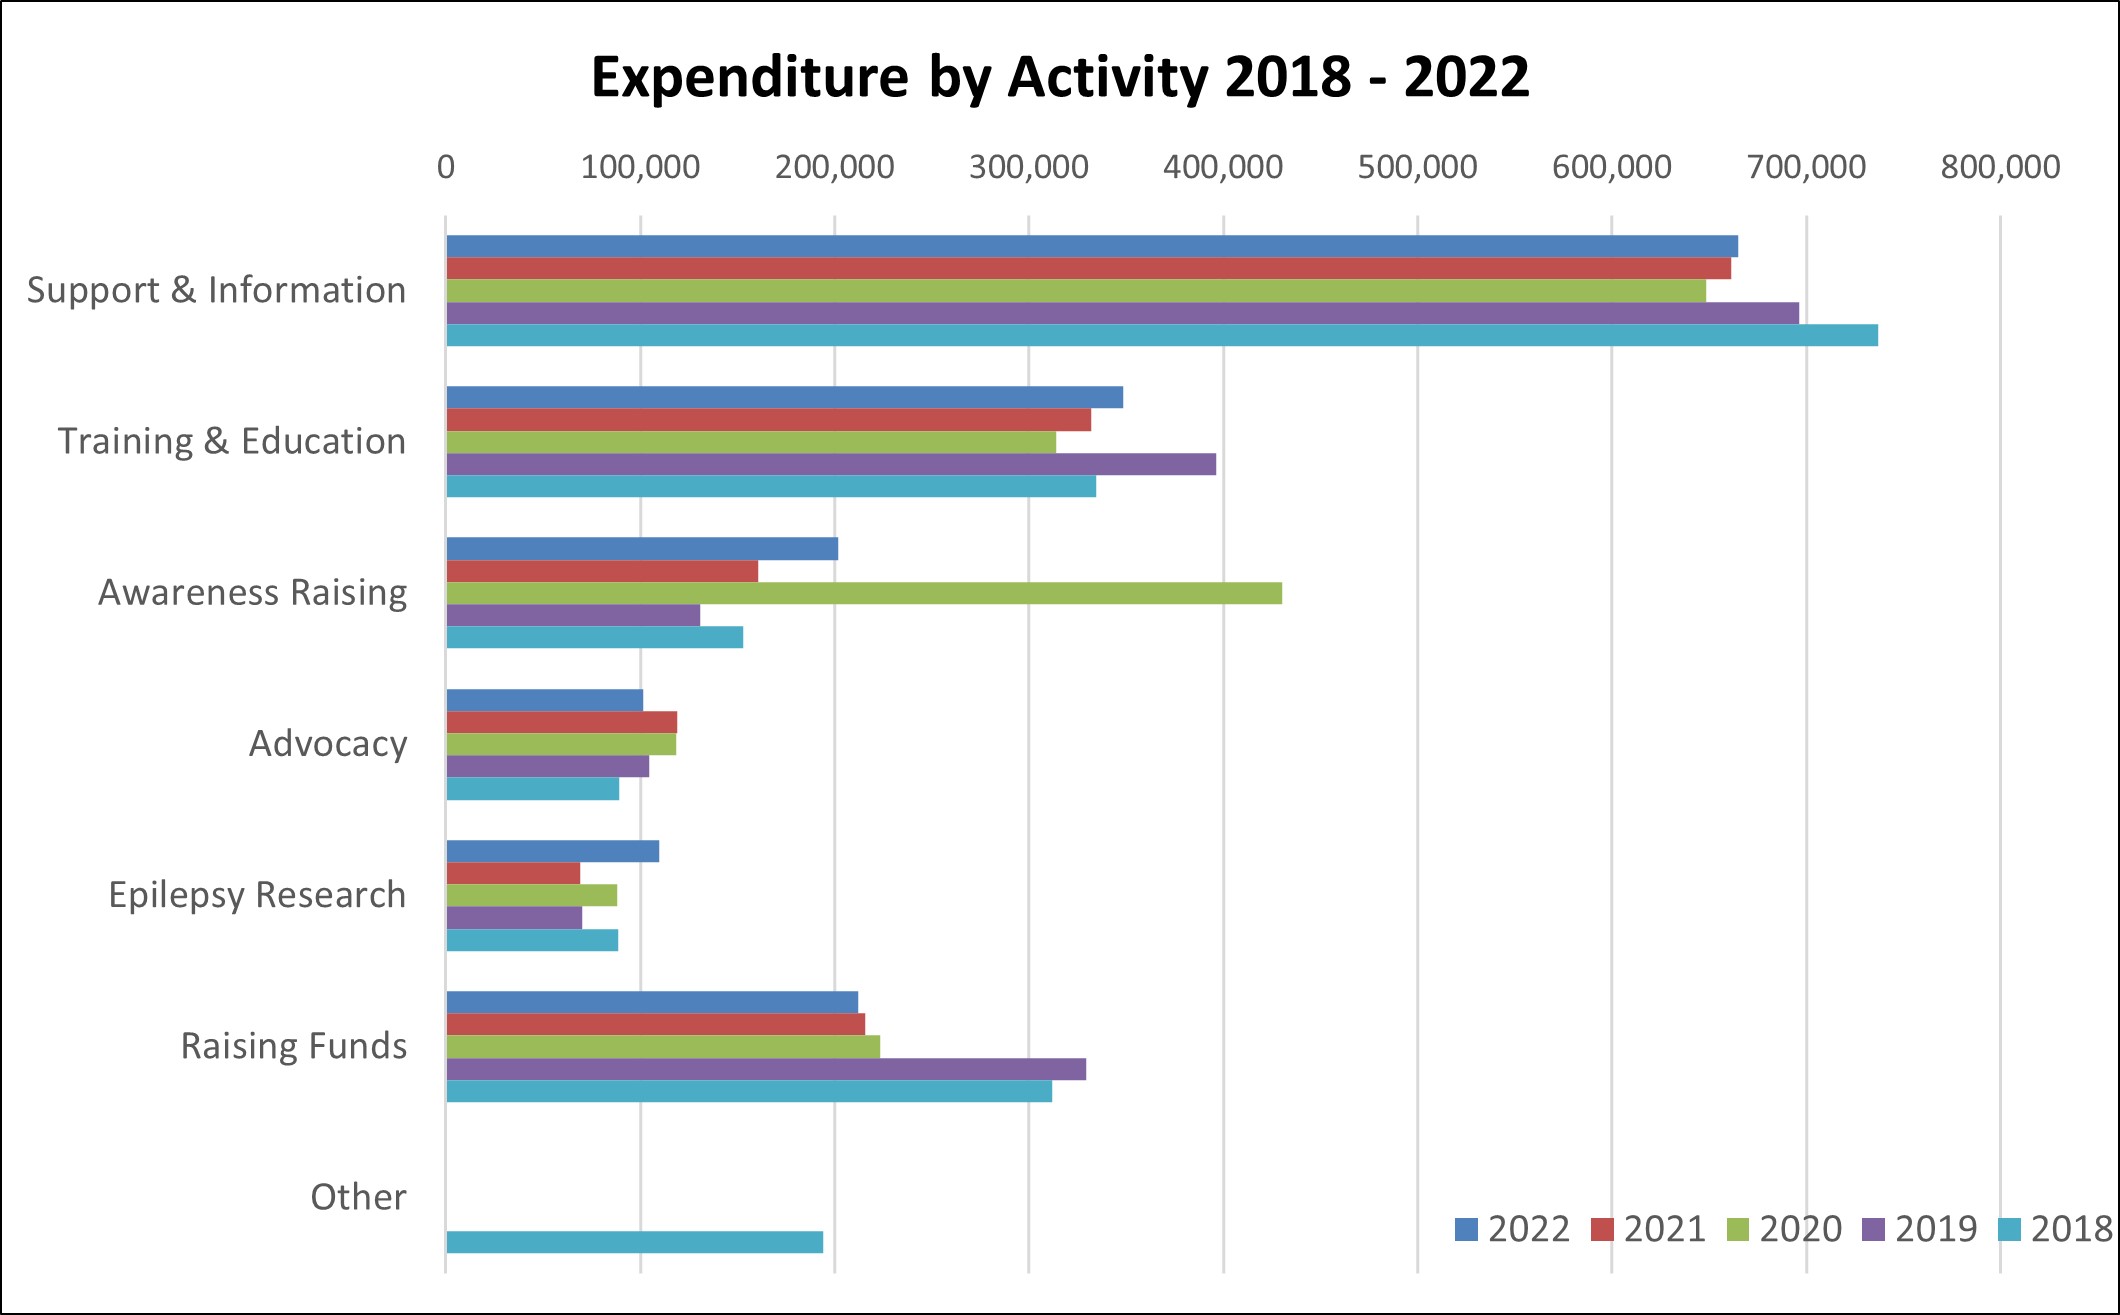 Chart showing expenditure by activity in 2022